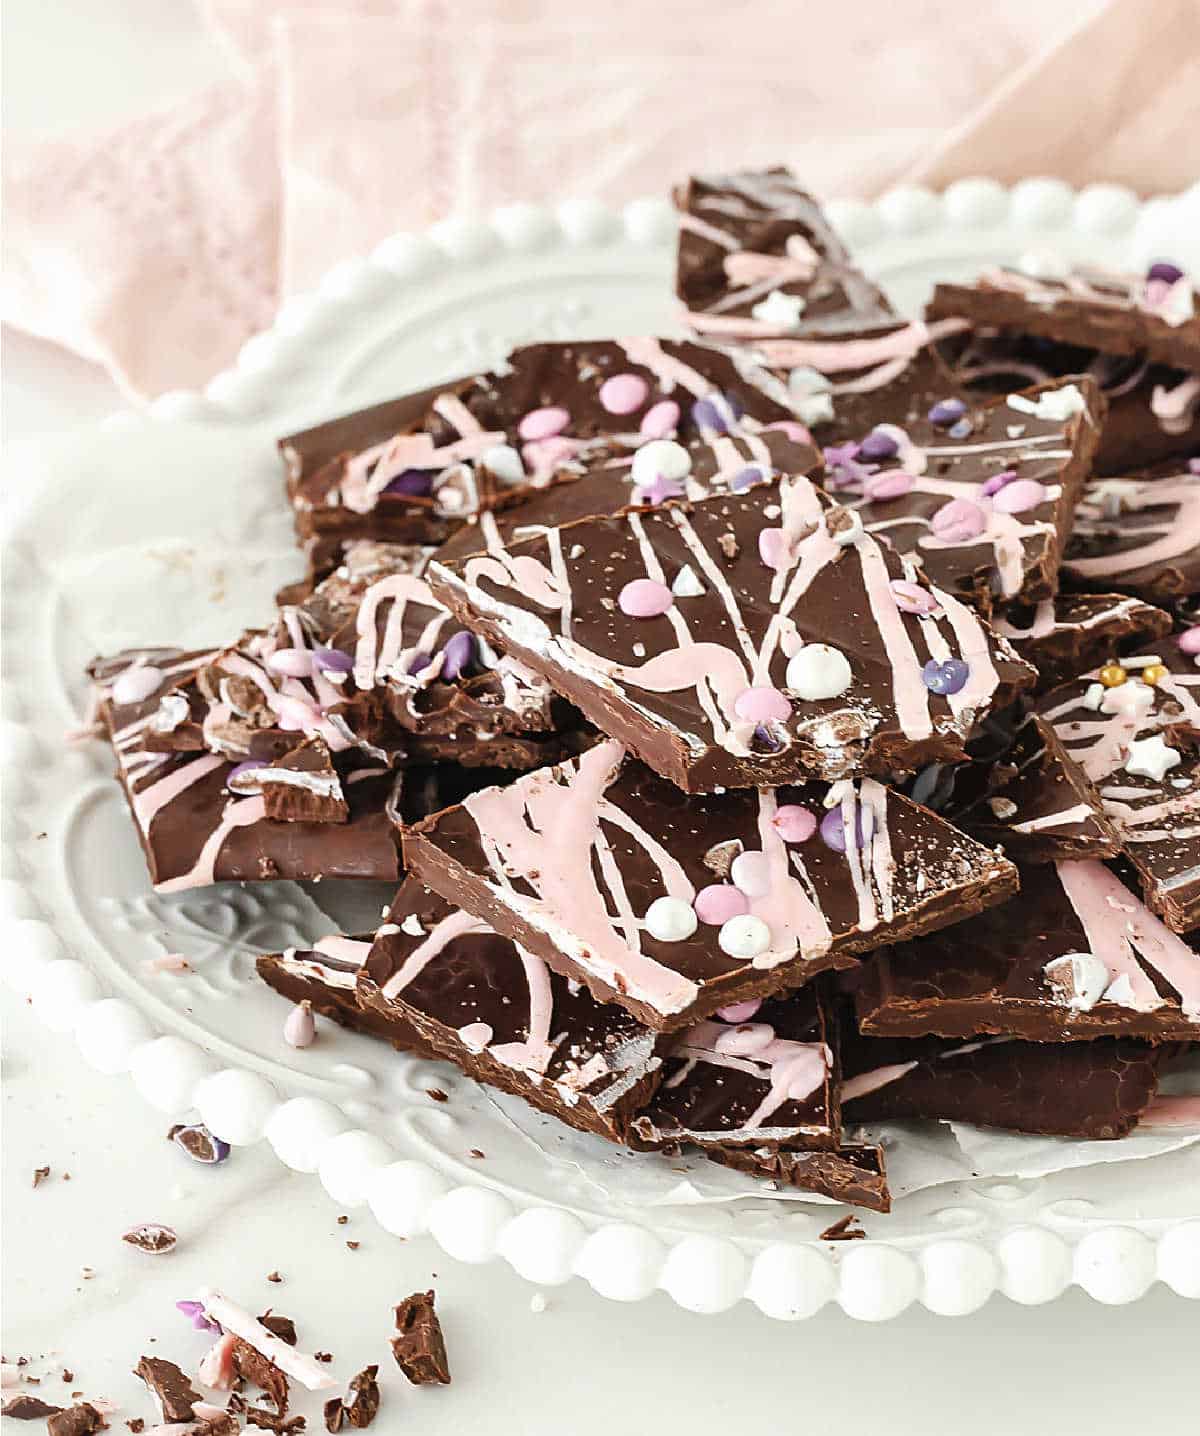 Pile of dark chocolate and pink bark pieces on a white plate. Light pink background.